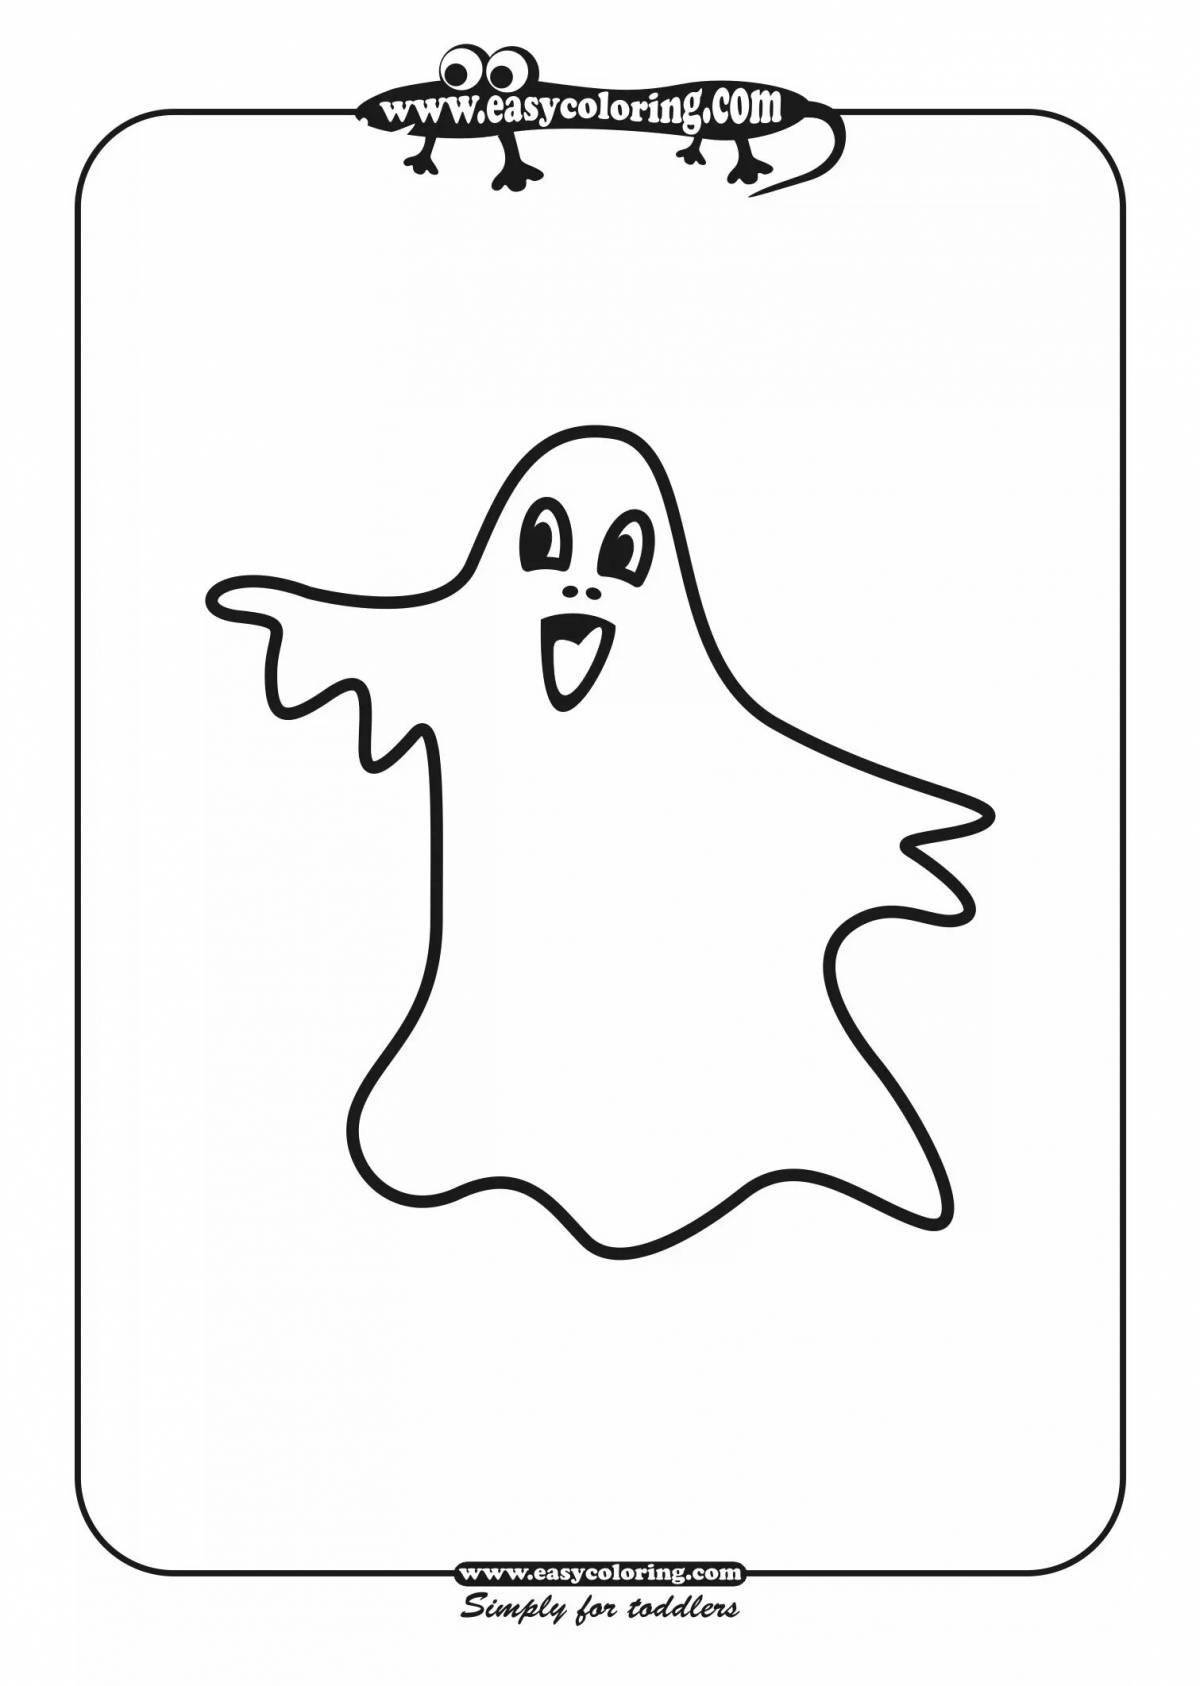 Magic ghost coloring for kids